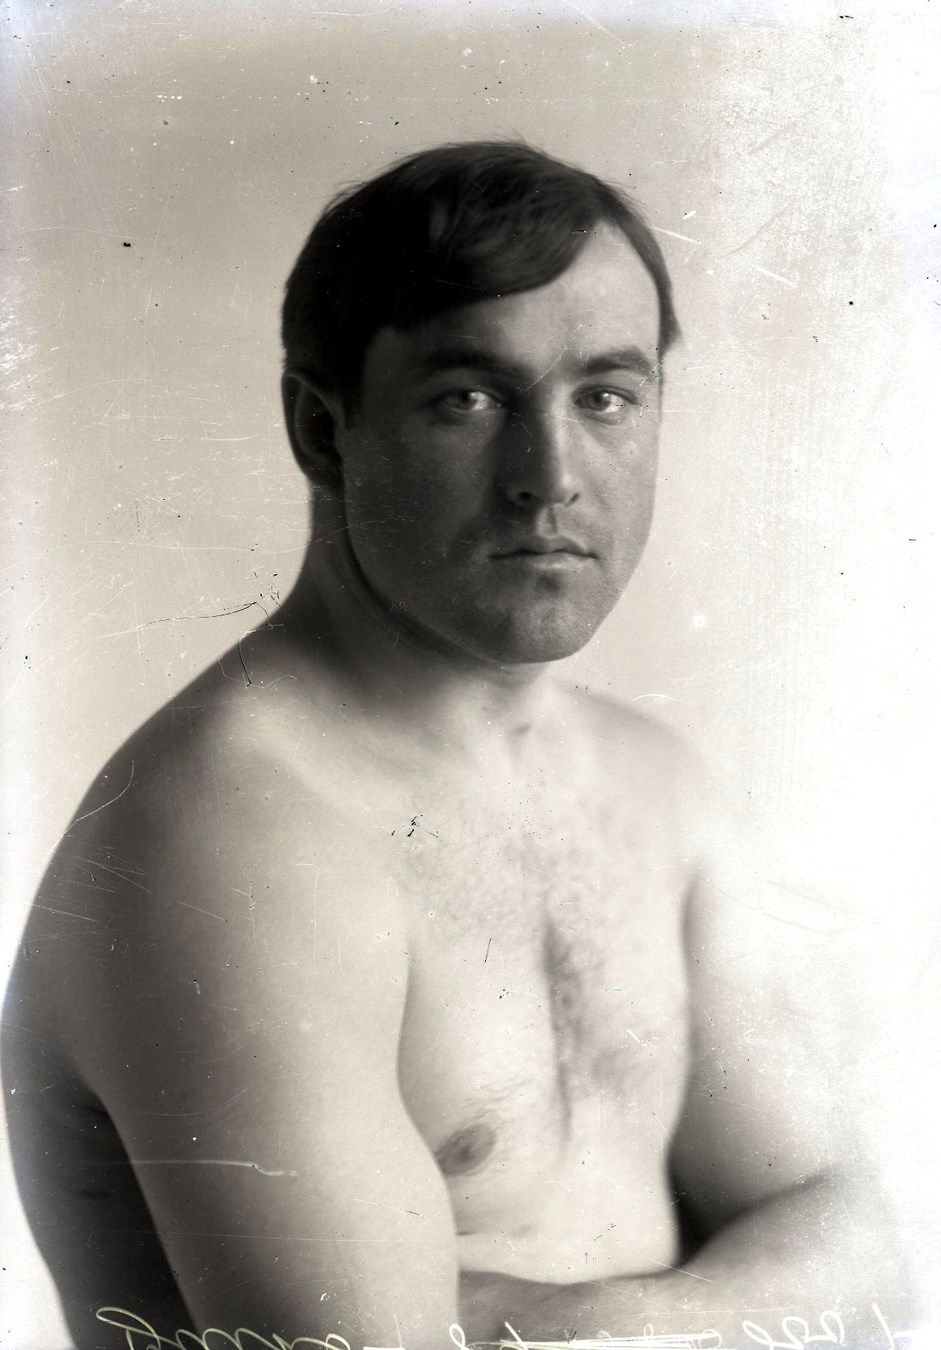 Dana Collection Of Important Boxing Negatives - 1907 Tommy Burns "Only Canadian World Heavyweight Champion" Type I Glass Plate Negative by Dana Studio